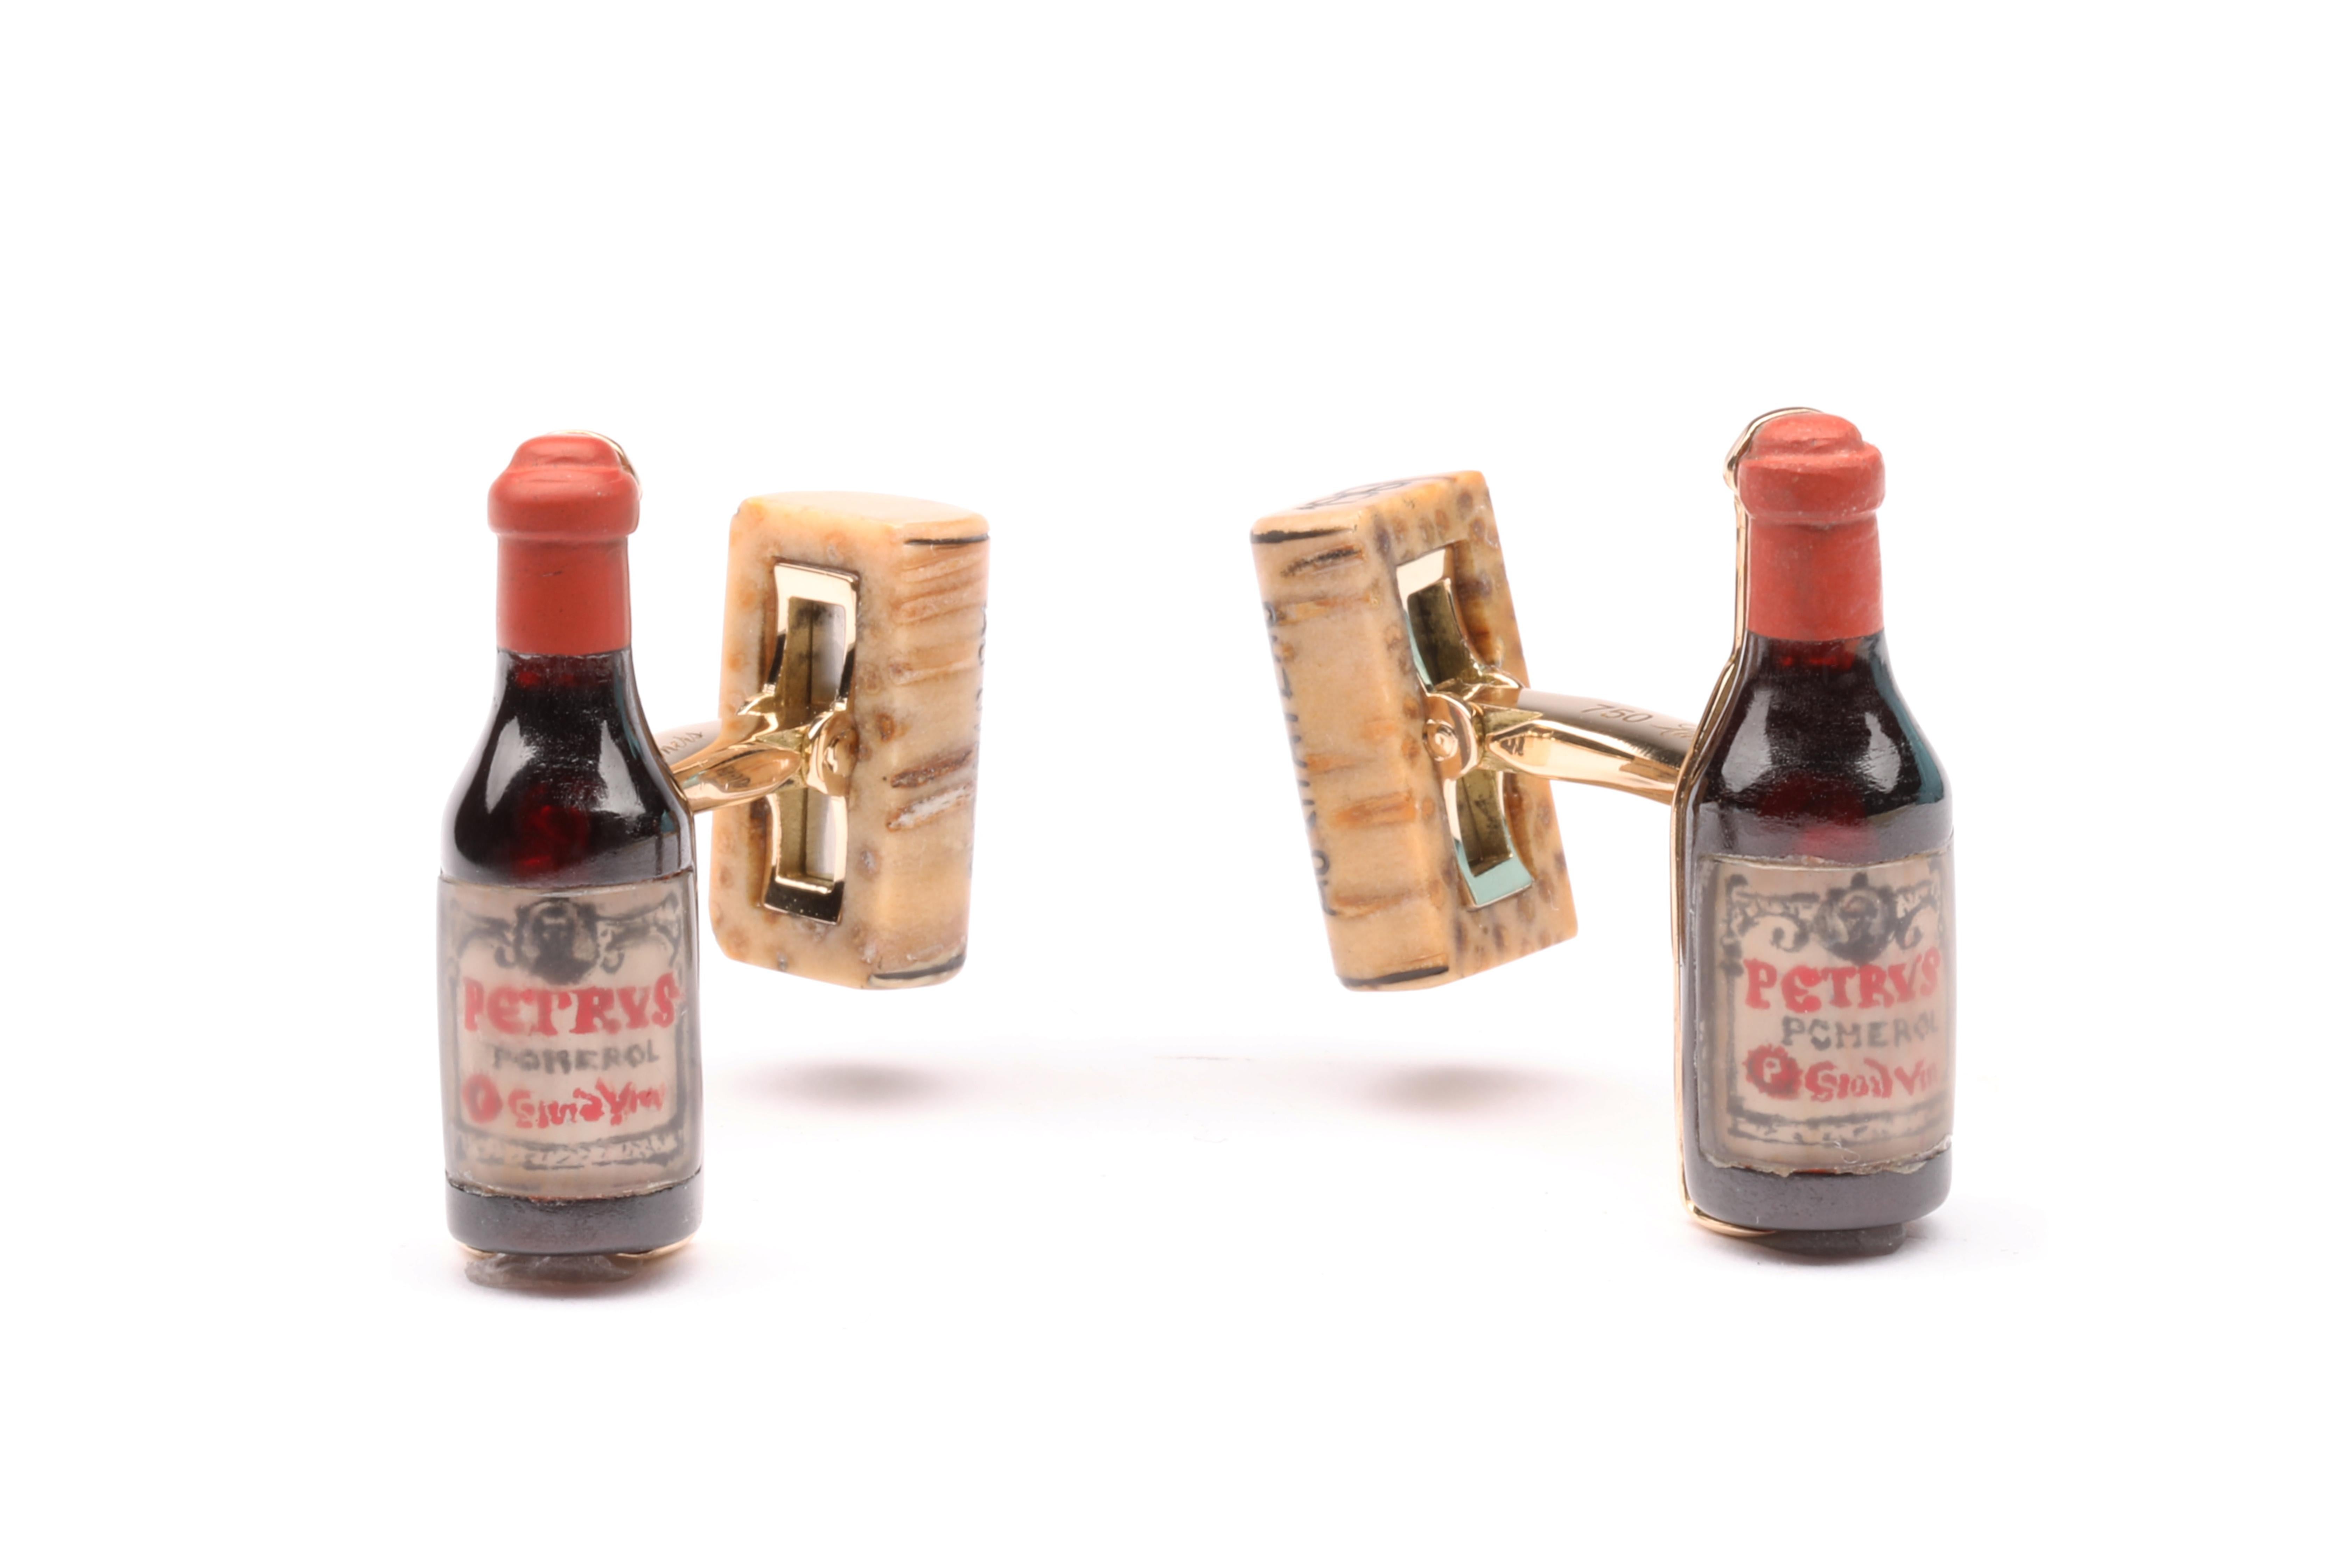 For the true connoisseur of fine wines, these are the absolute finest wine themed cufflinks.  The work involved in their creation is as painstaking, and nearly as time consuming, as the creation of any fine vintage wine.  The exceptionally realistic